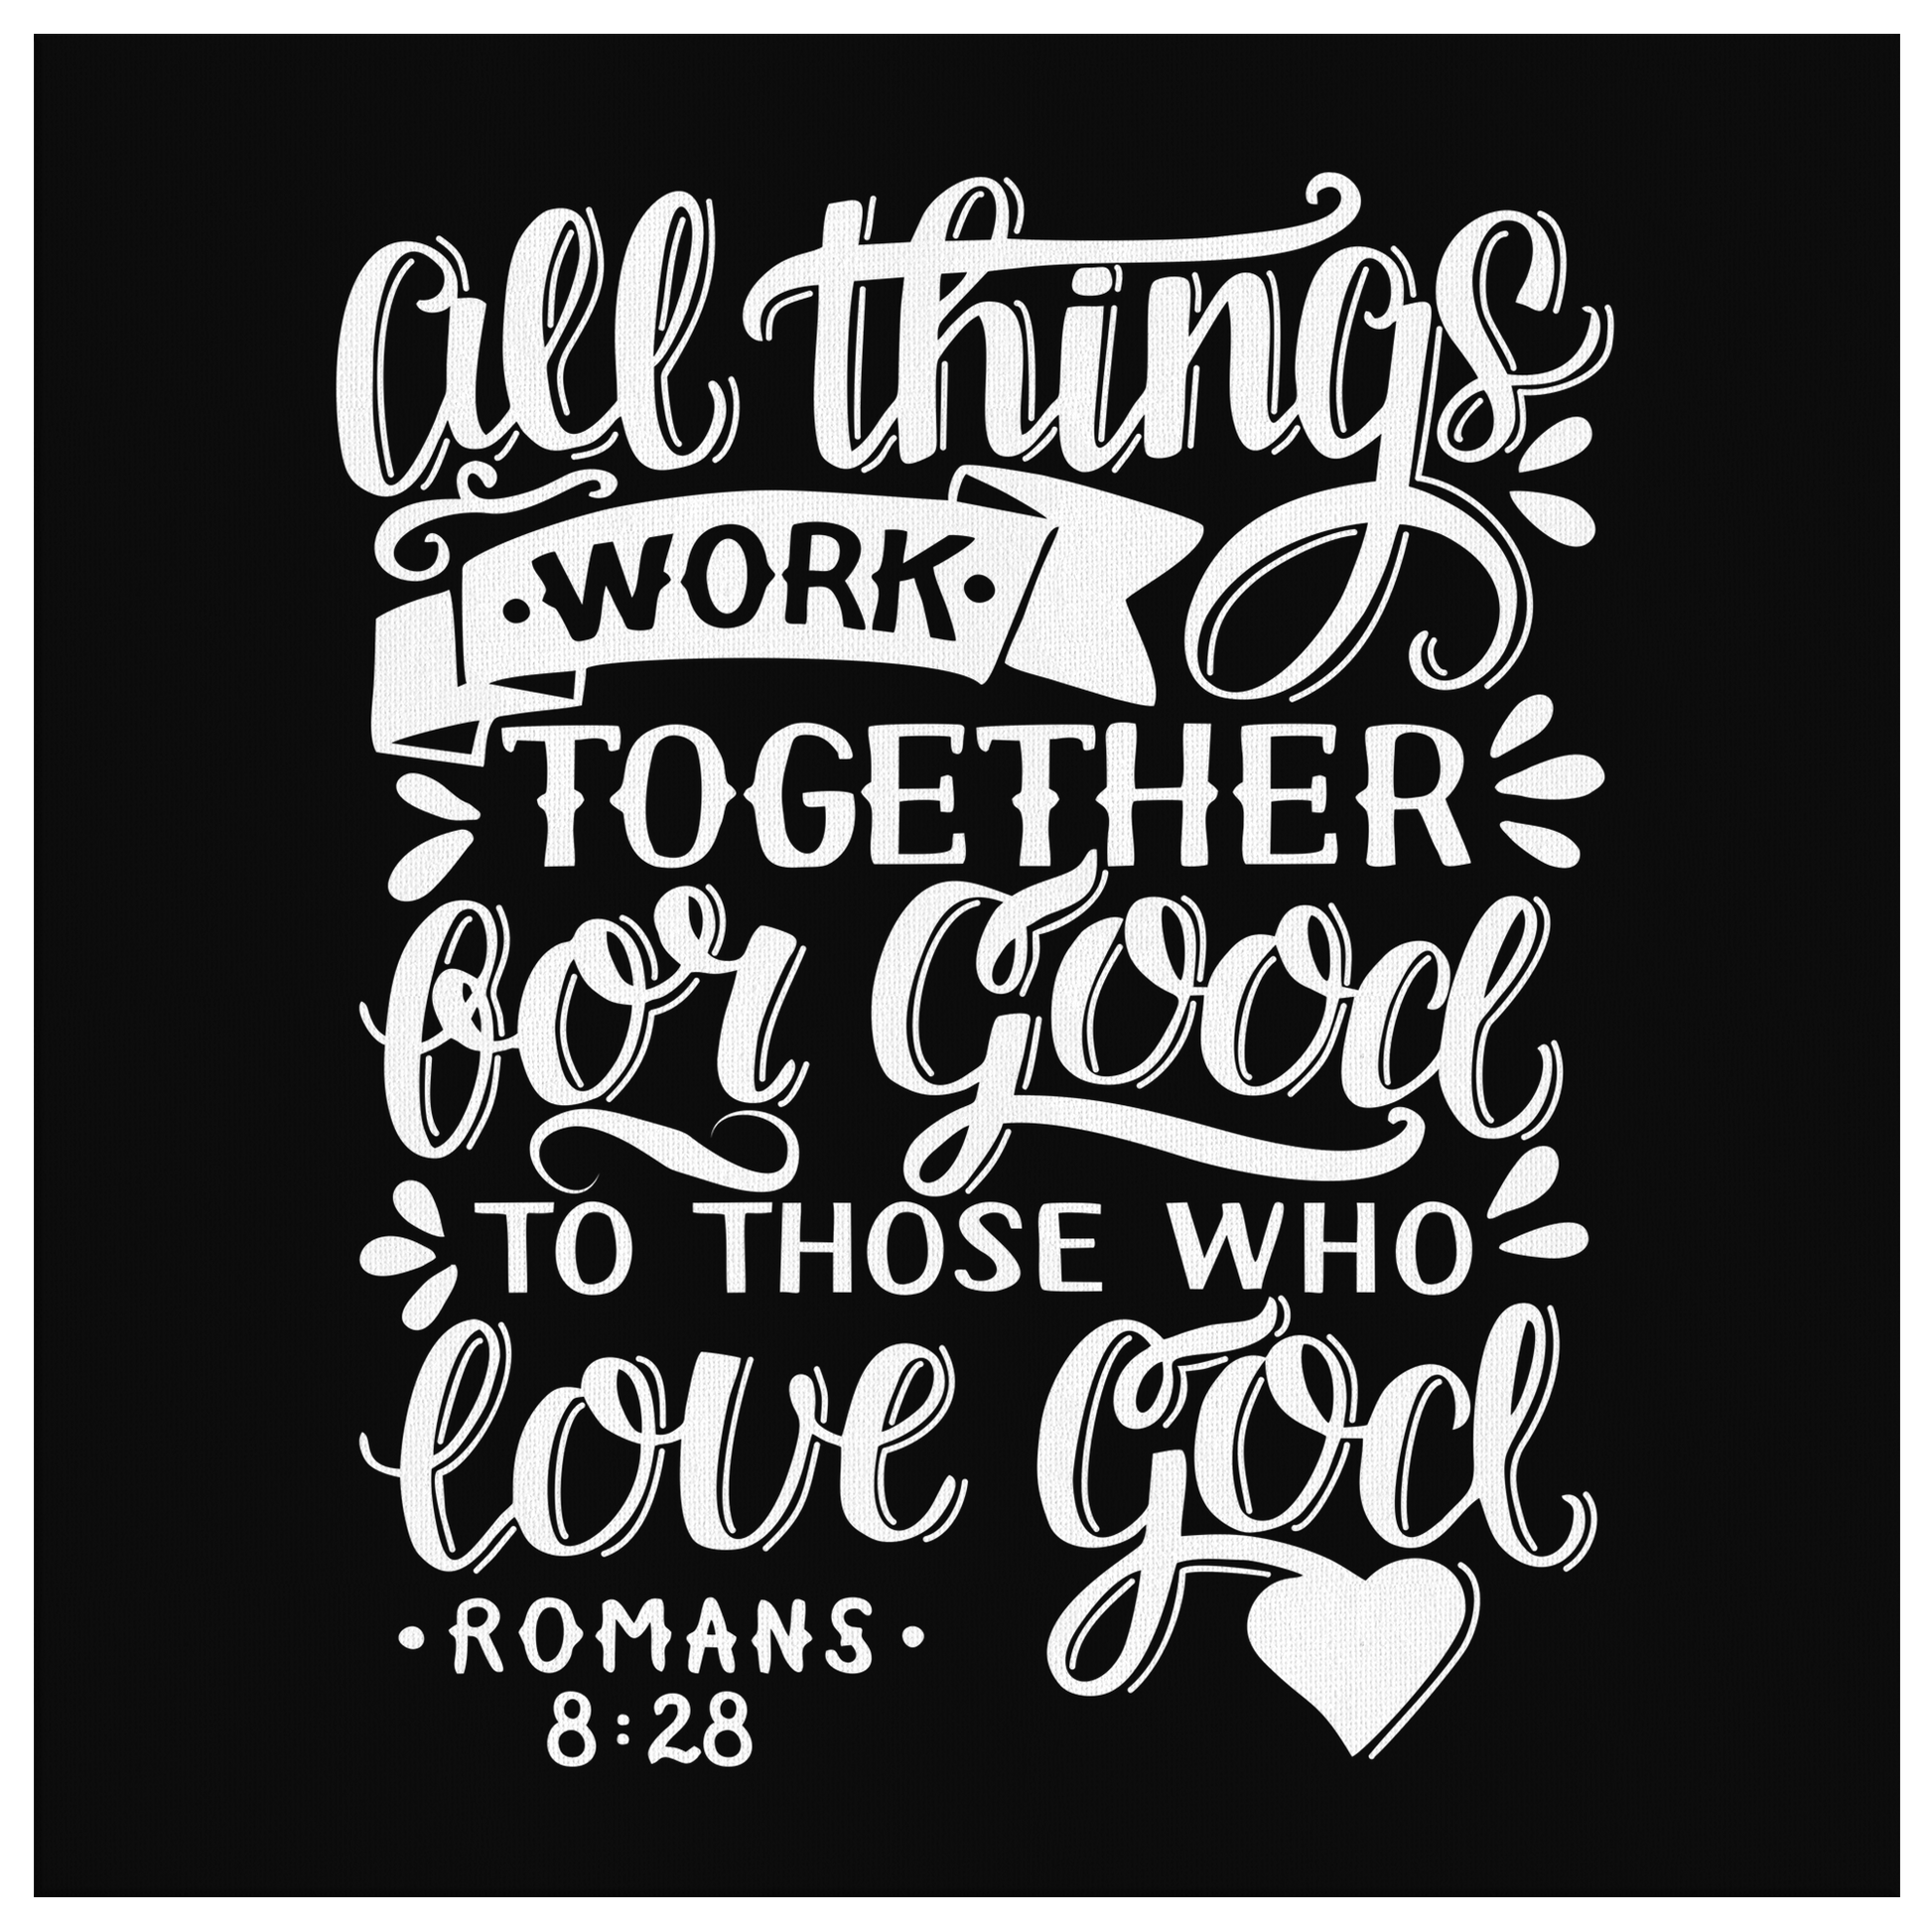 All Things Work Together For Good To Those Who Love God, Romans 8:28 - Square Gallery Canvas Wrap flat